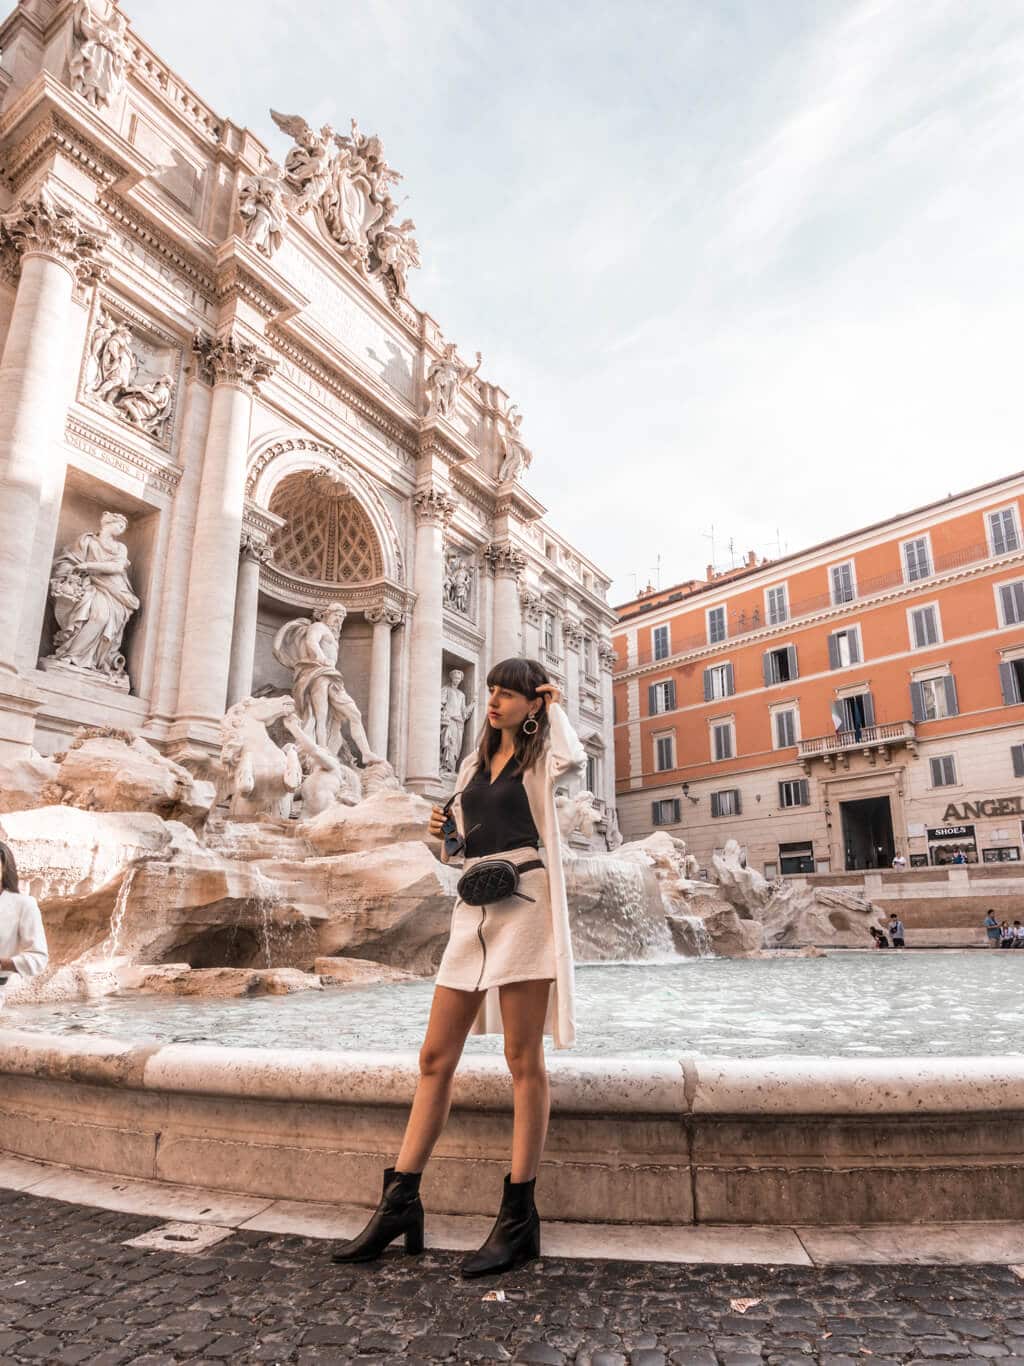 A Guide For Planning A Trip To Rome - Things to do in romantic Rome {3 day itinerary, including food & restaurants tips, shopping and sightseeing}